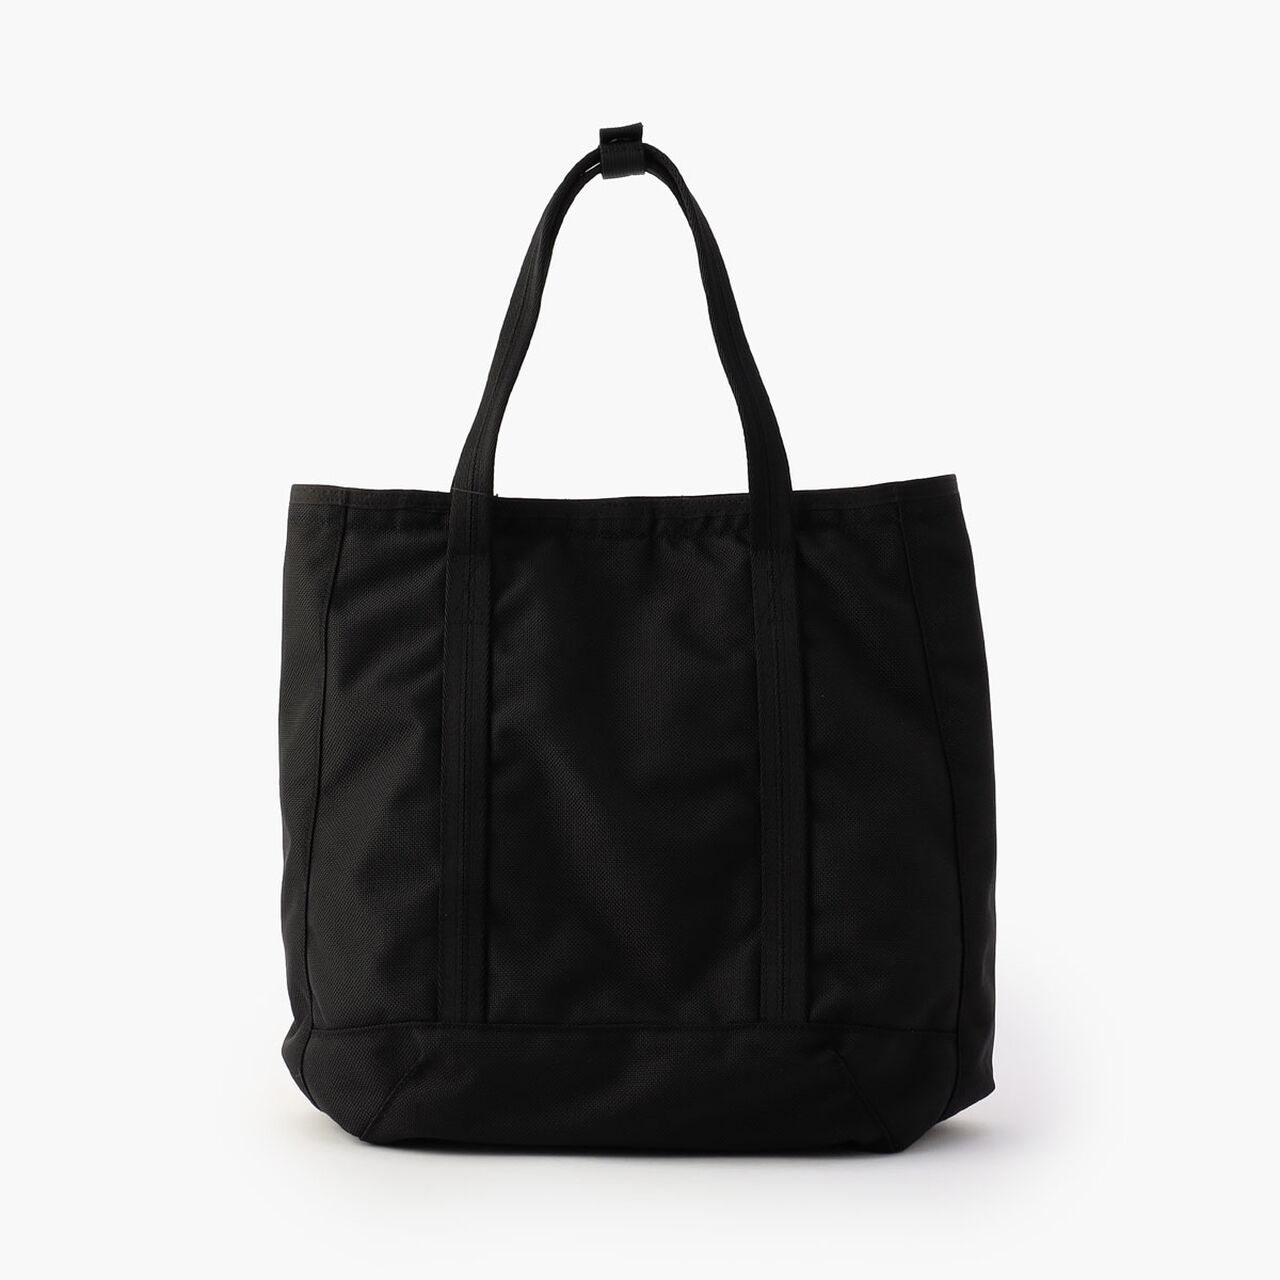 DELTA MASTER TOTE TALL SQD,黑色, large image number 2